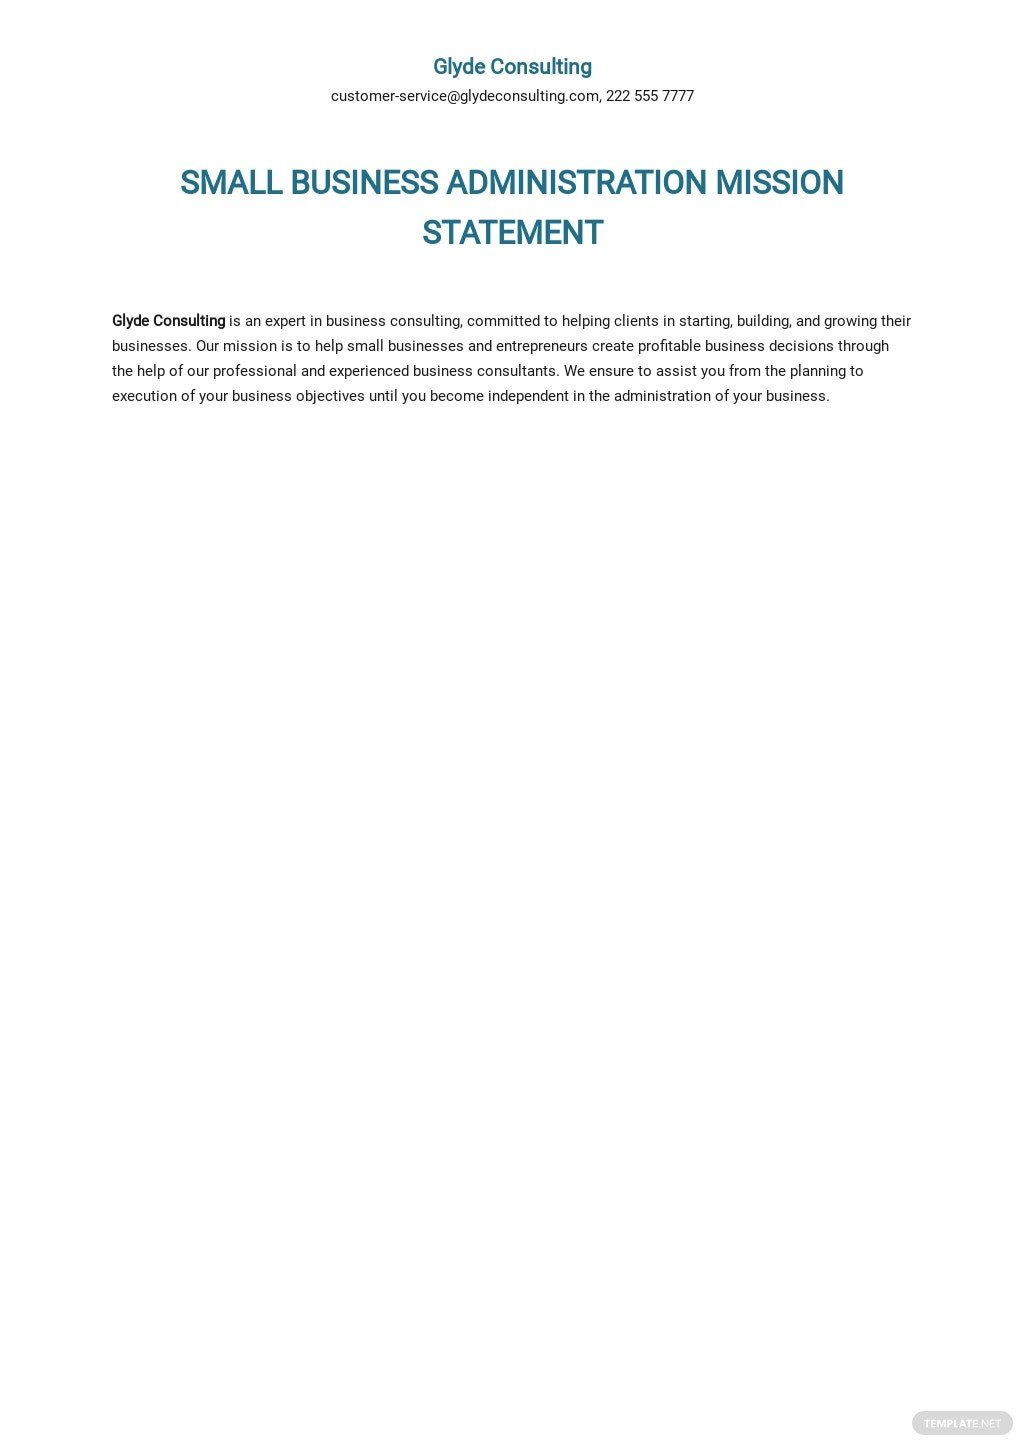 small-business-administration-mission-statement-template